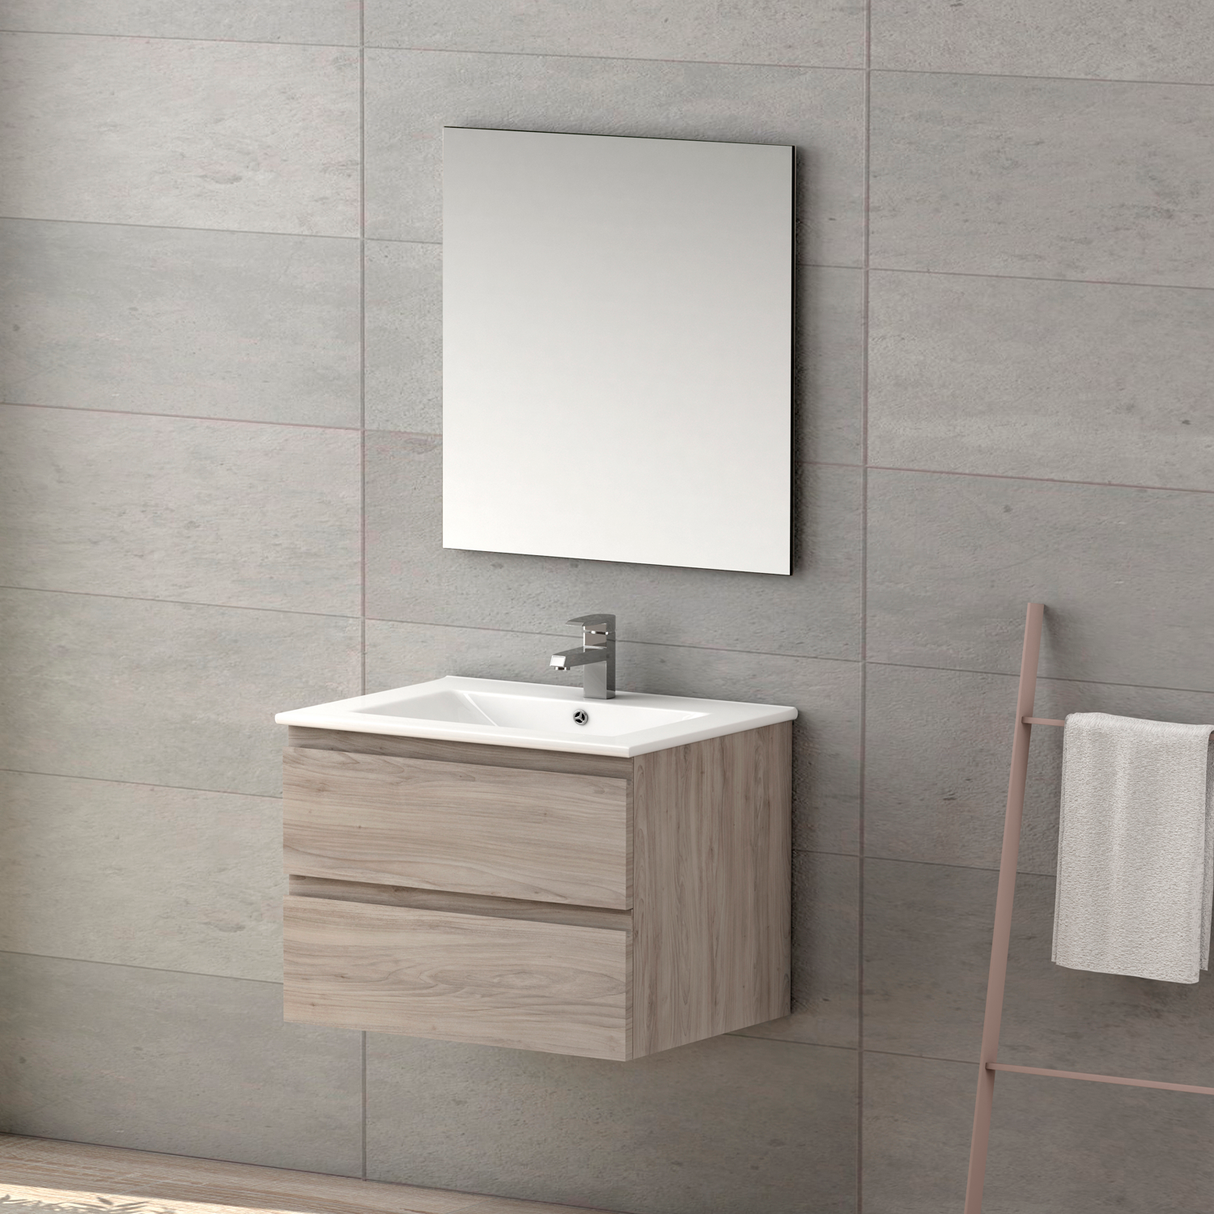 DAX Pasadena Engineered Wood and Porcelain Onix Basin with Single Vanity Cabinet, 28", Pine DAX-PAS012812-ONX